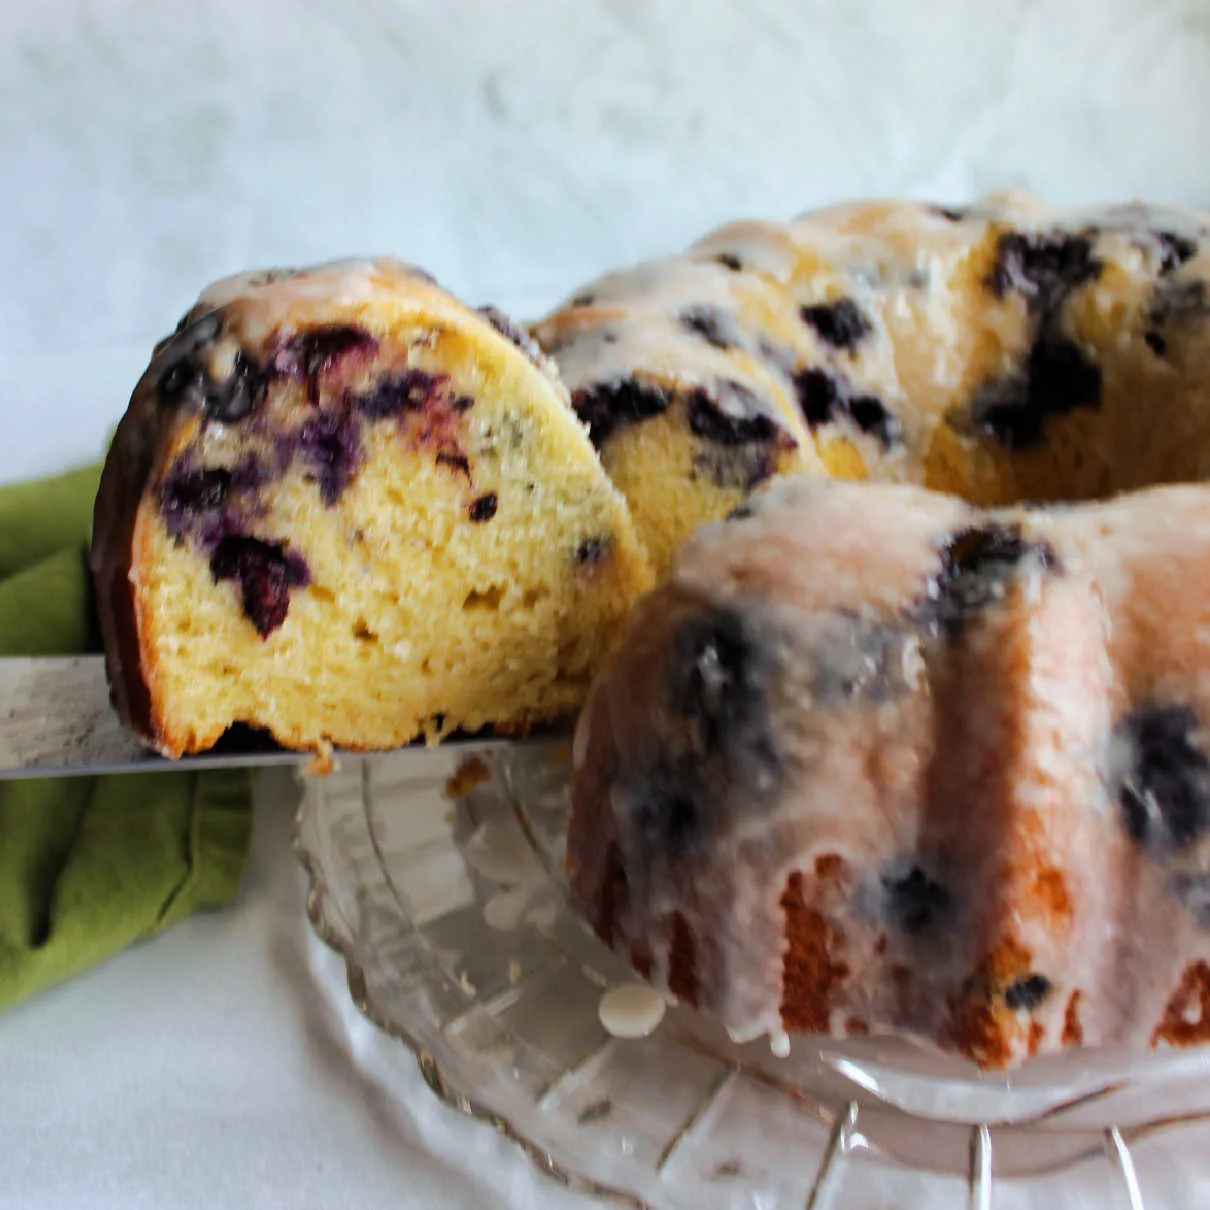 Lifting slice of lemon blueberry bundt cake out of cake showing pale yellow center with lots of blueberry specks.